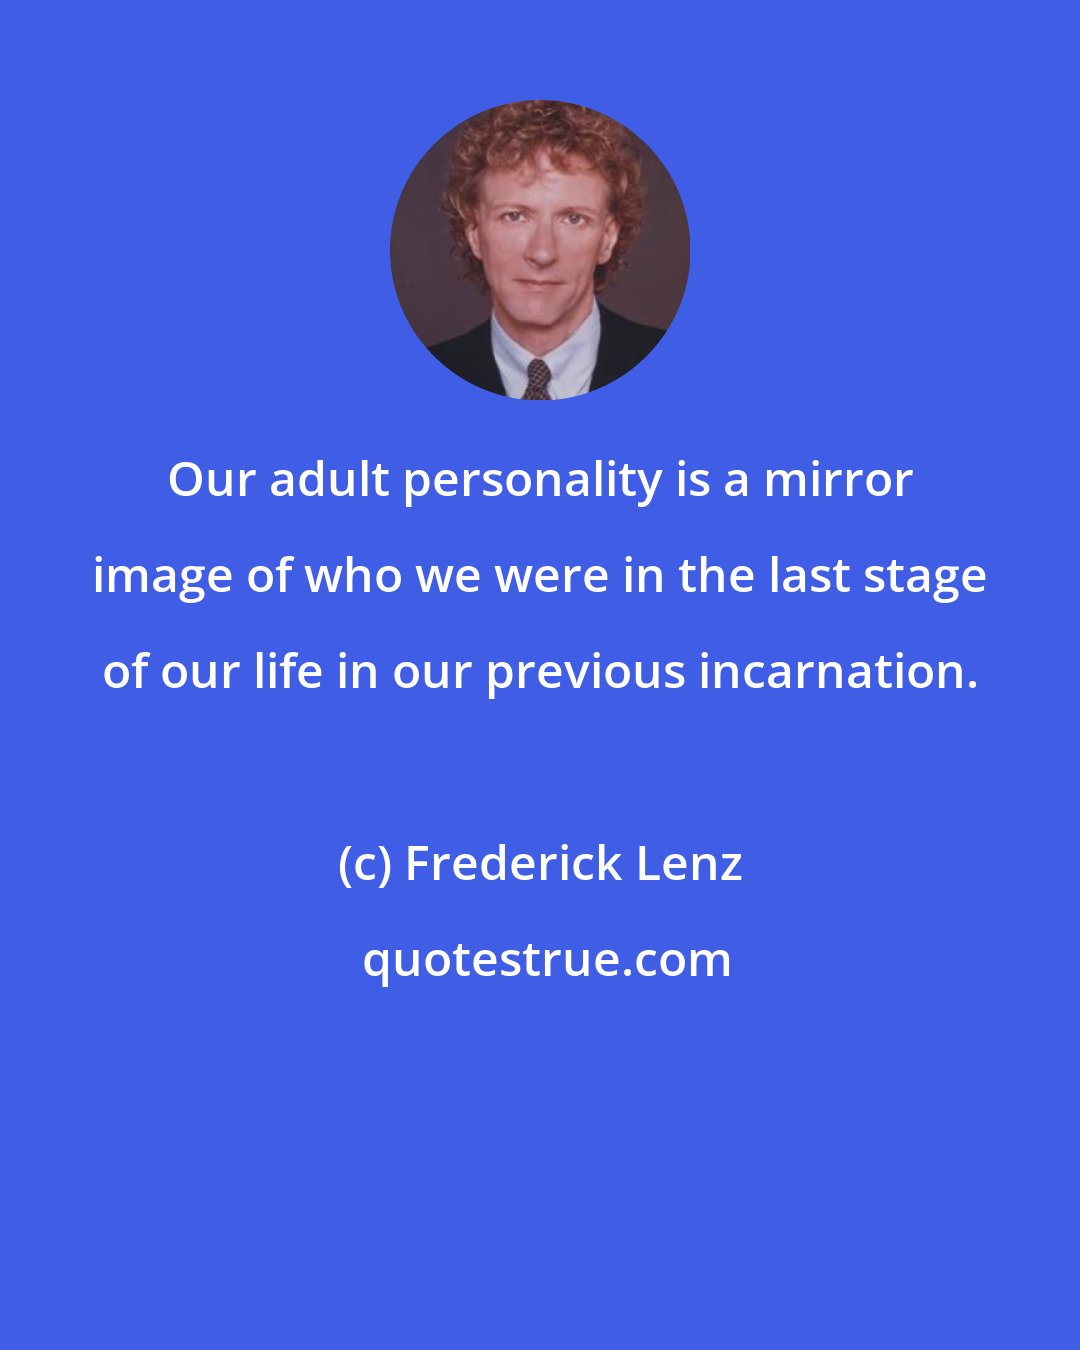 Frederick Lenz: Our adult personality is a mirror image of who we were in the last stage of our life in our previous incarnation.